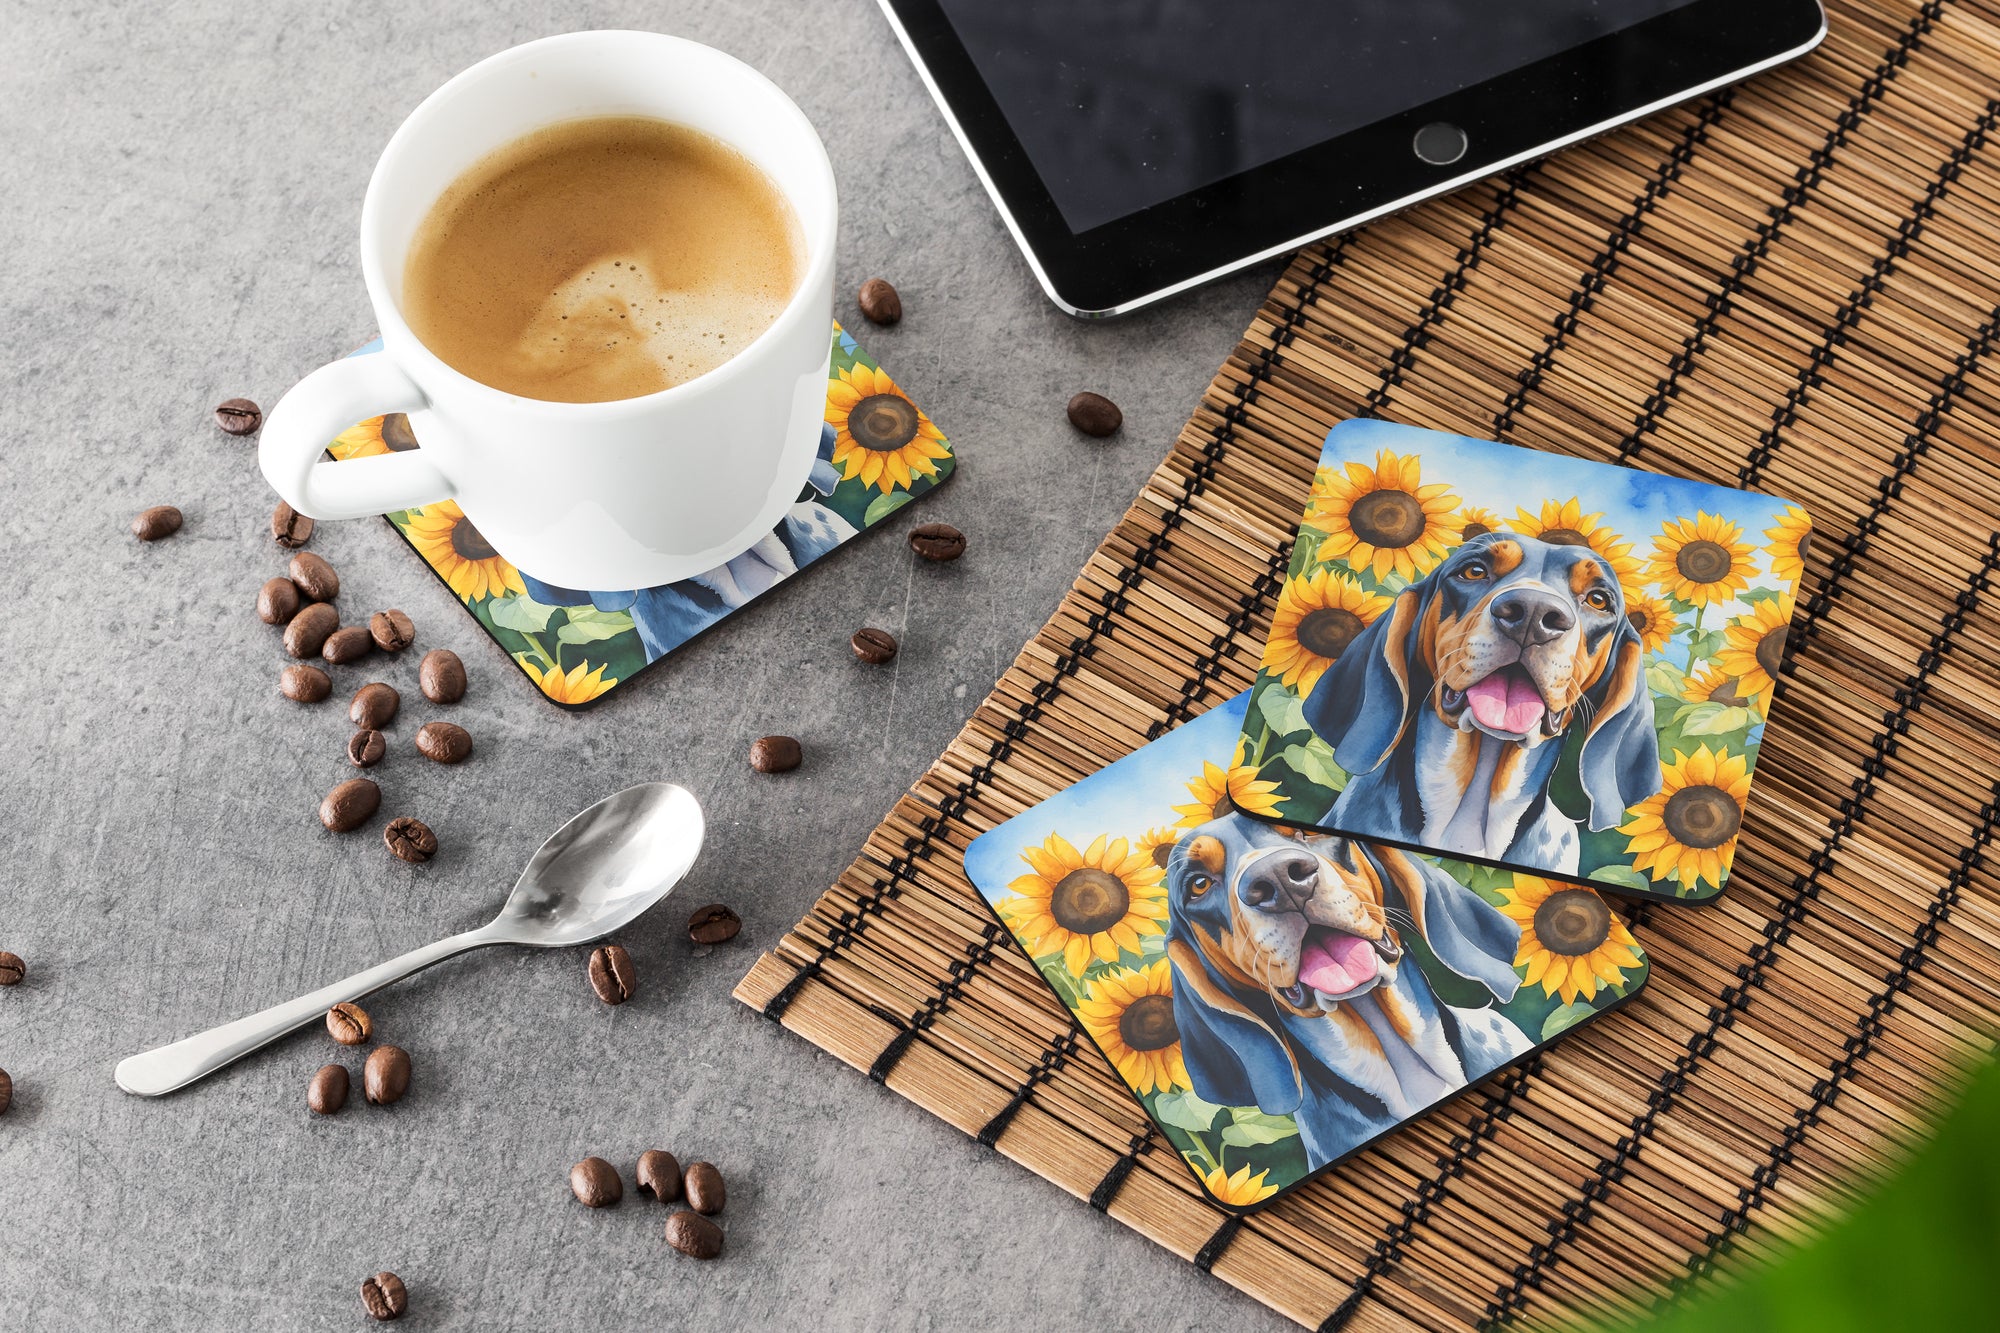 American English Coonhound in Sunflowers Foam Coasters